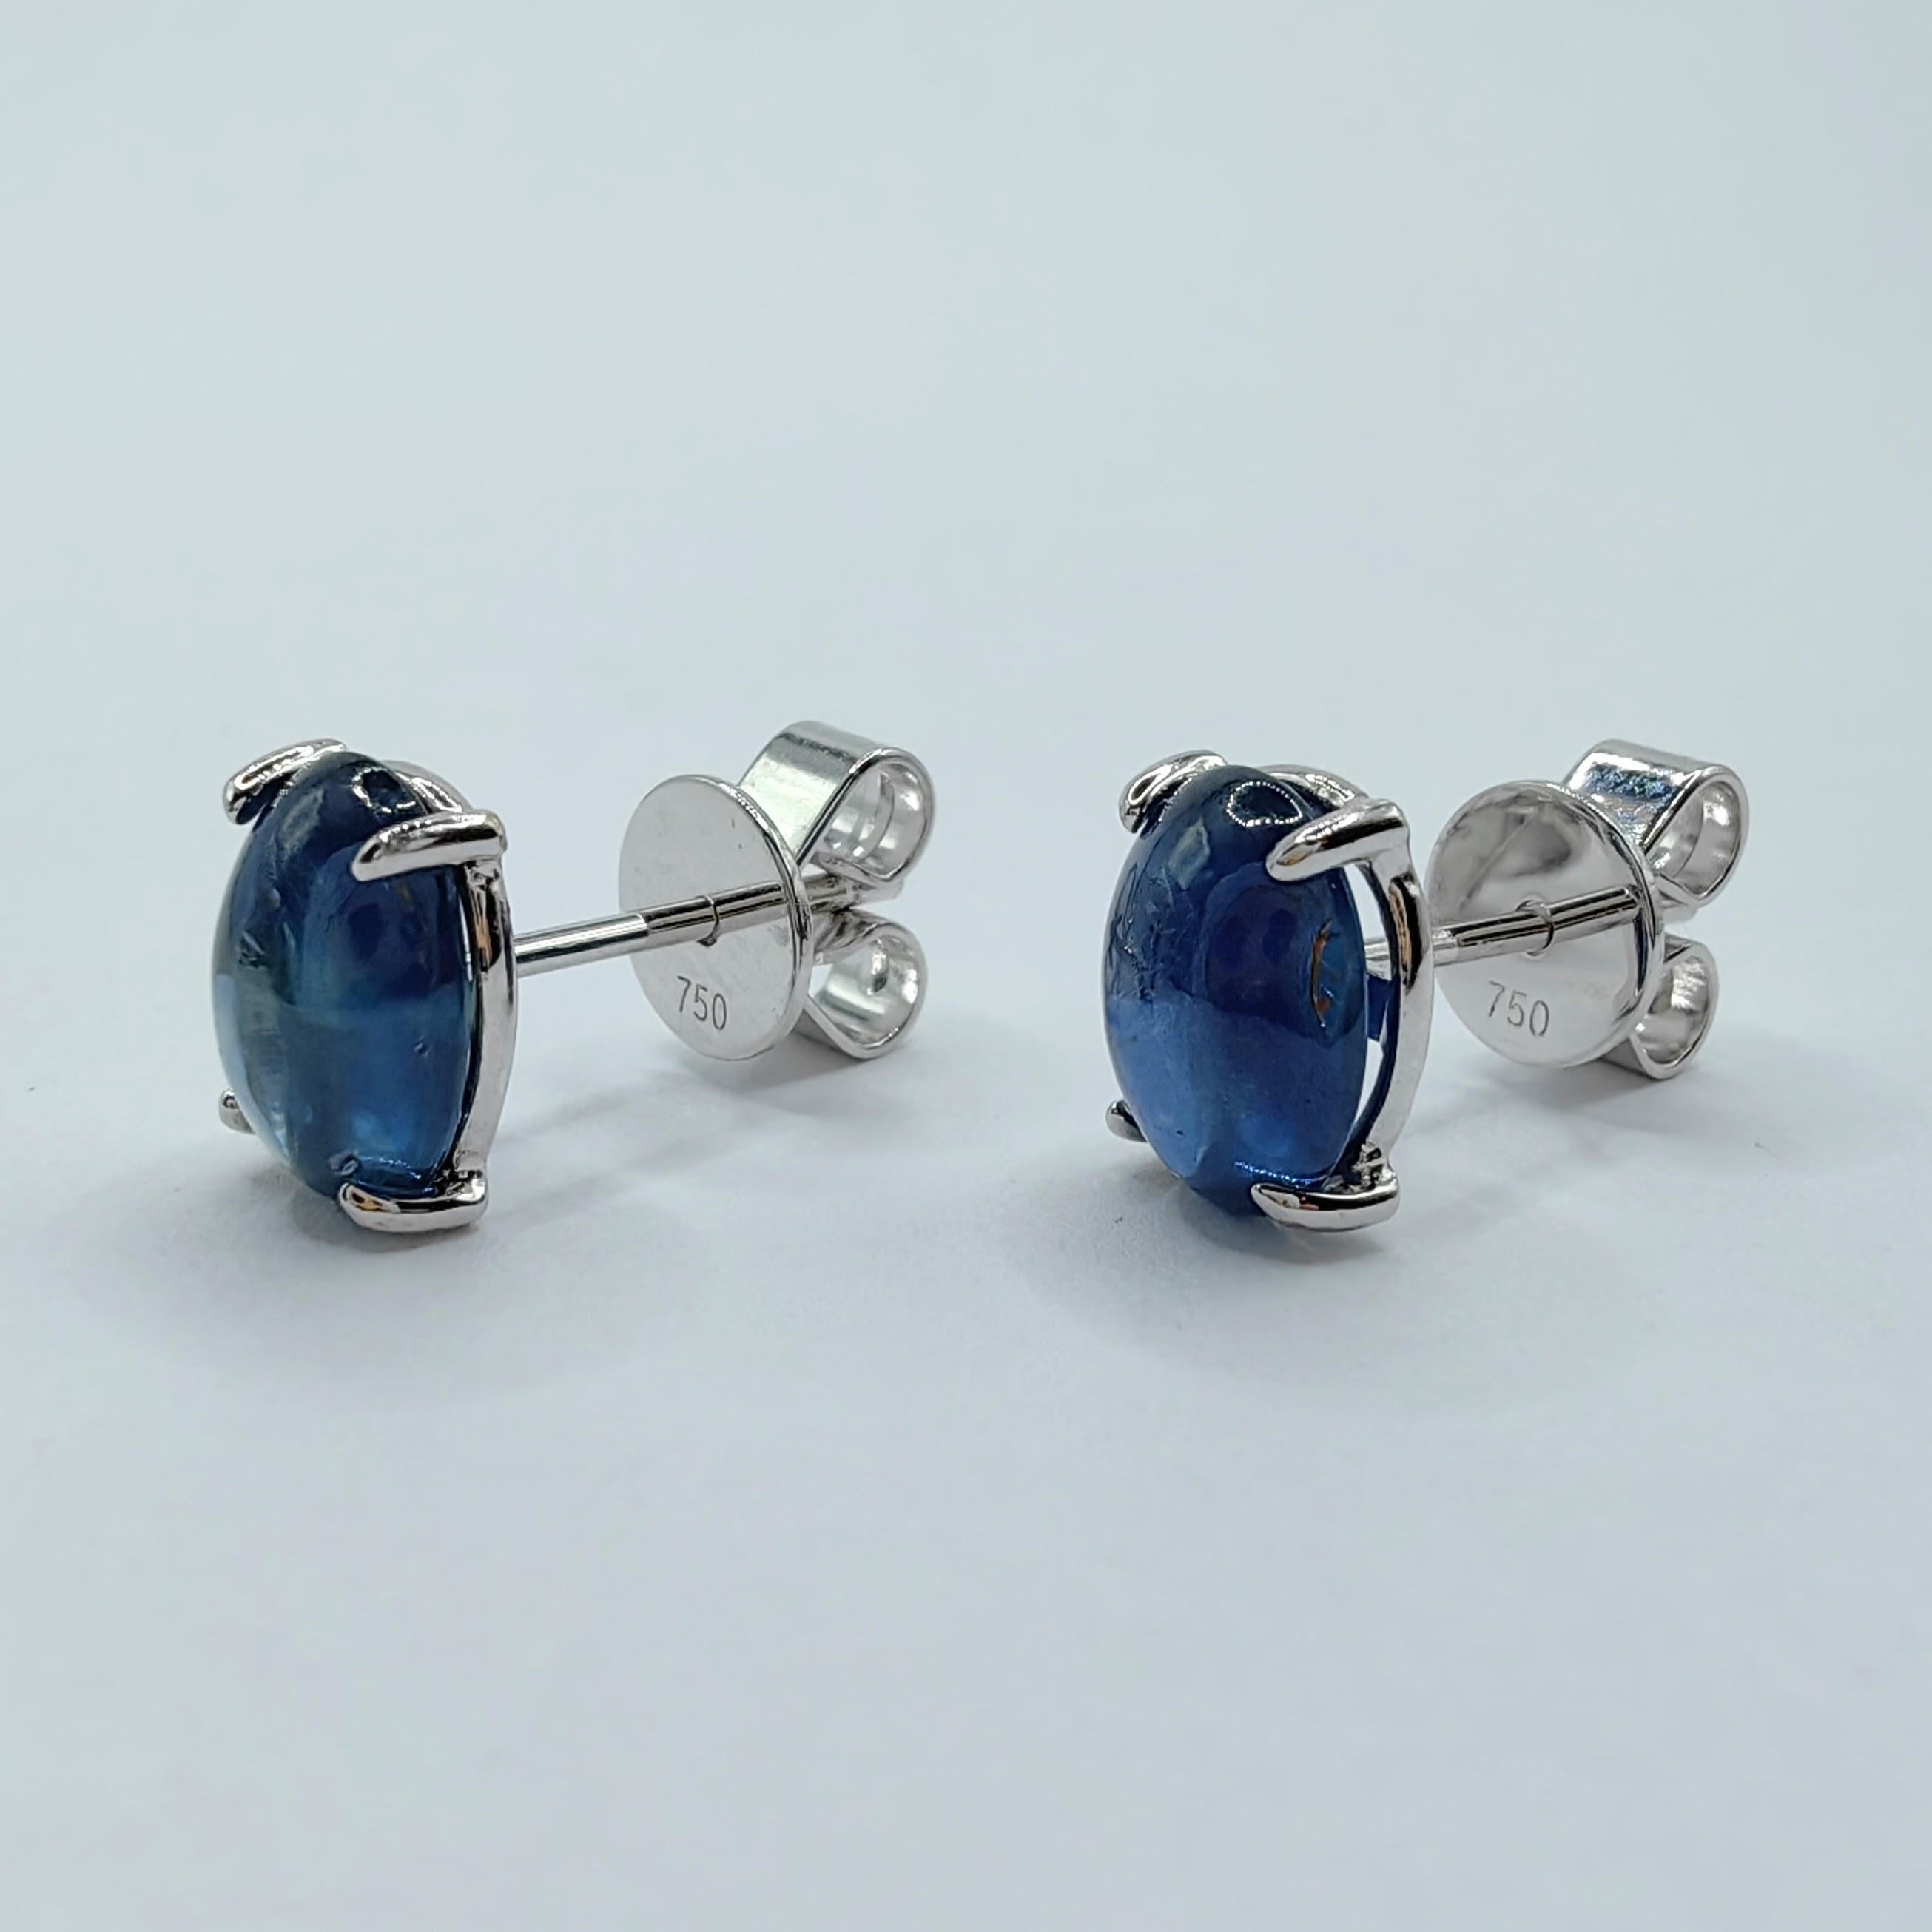 Introducing our stunning Matched 2.95 Carat 8x6mm Cabochon Blue Sapphire Stud Earrings, where the timeless beauty of blue sapphires and the elegance of 18K white gold harmonize to create a truly remarkable piece.

These earrings feature two